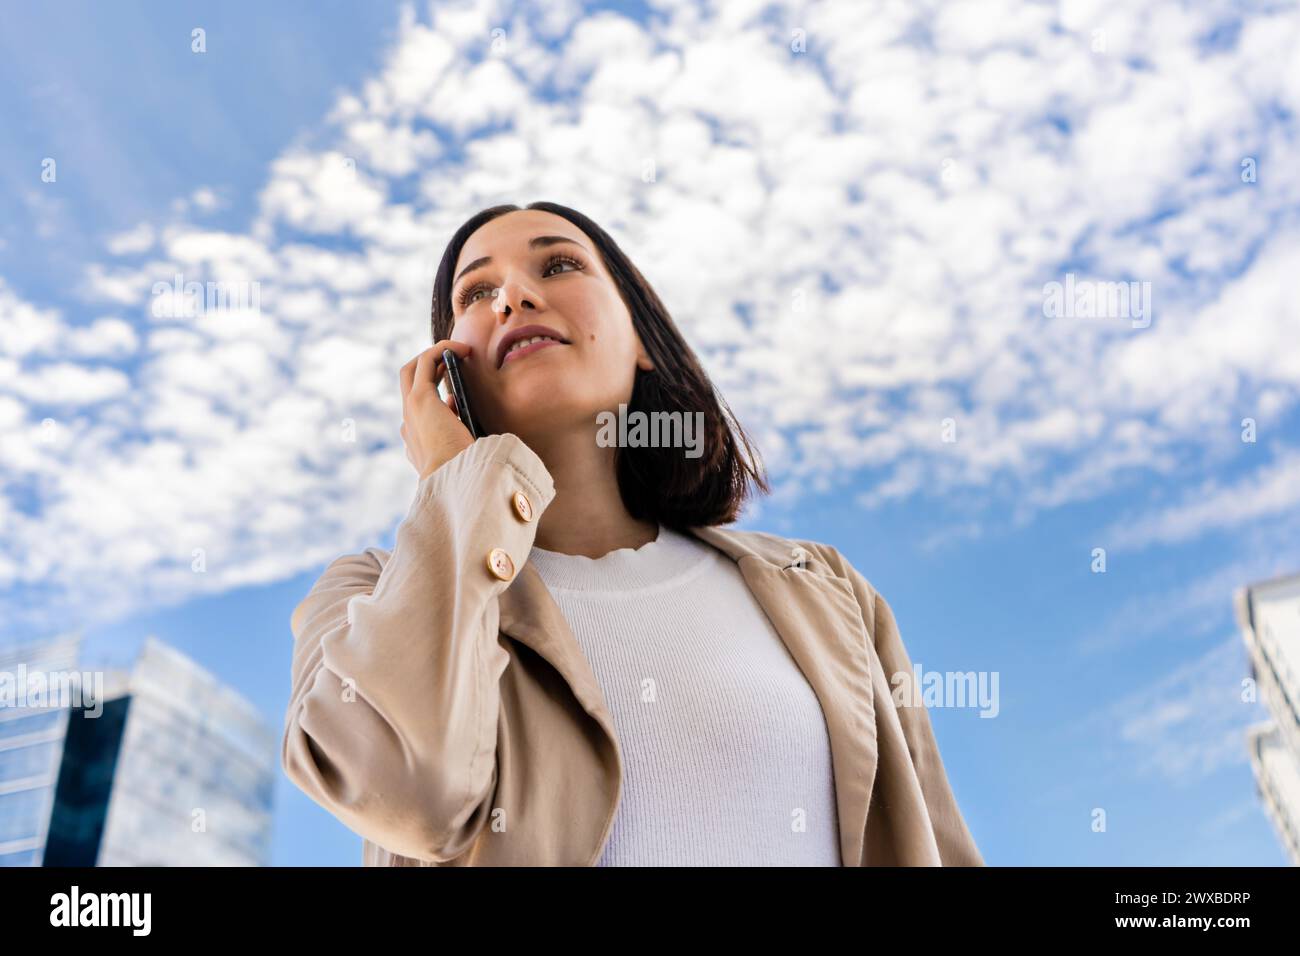 Low-angle view of a woman talking on her cell phone as she looks ahead Stock Photo